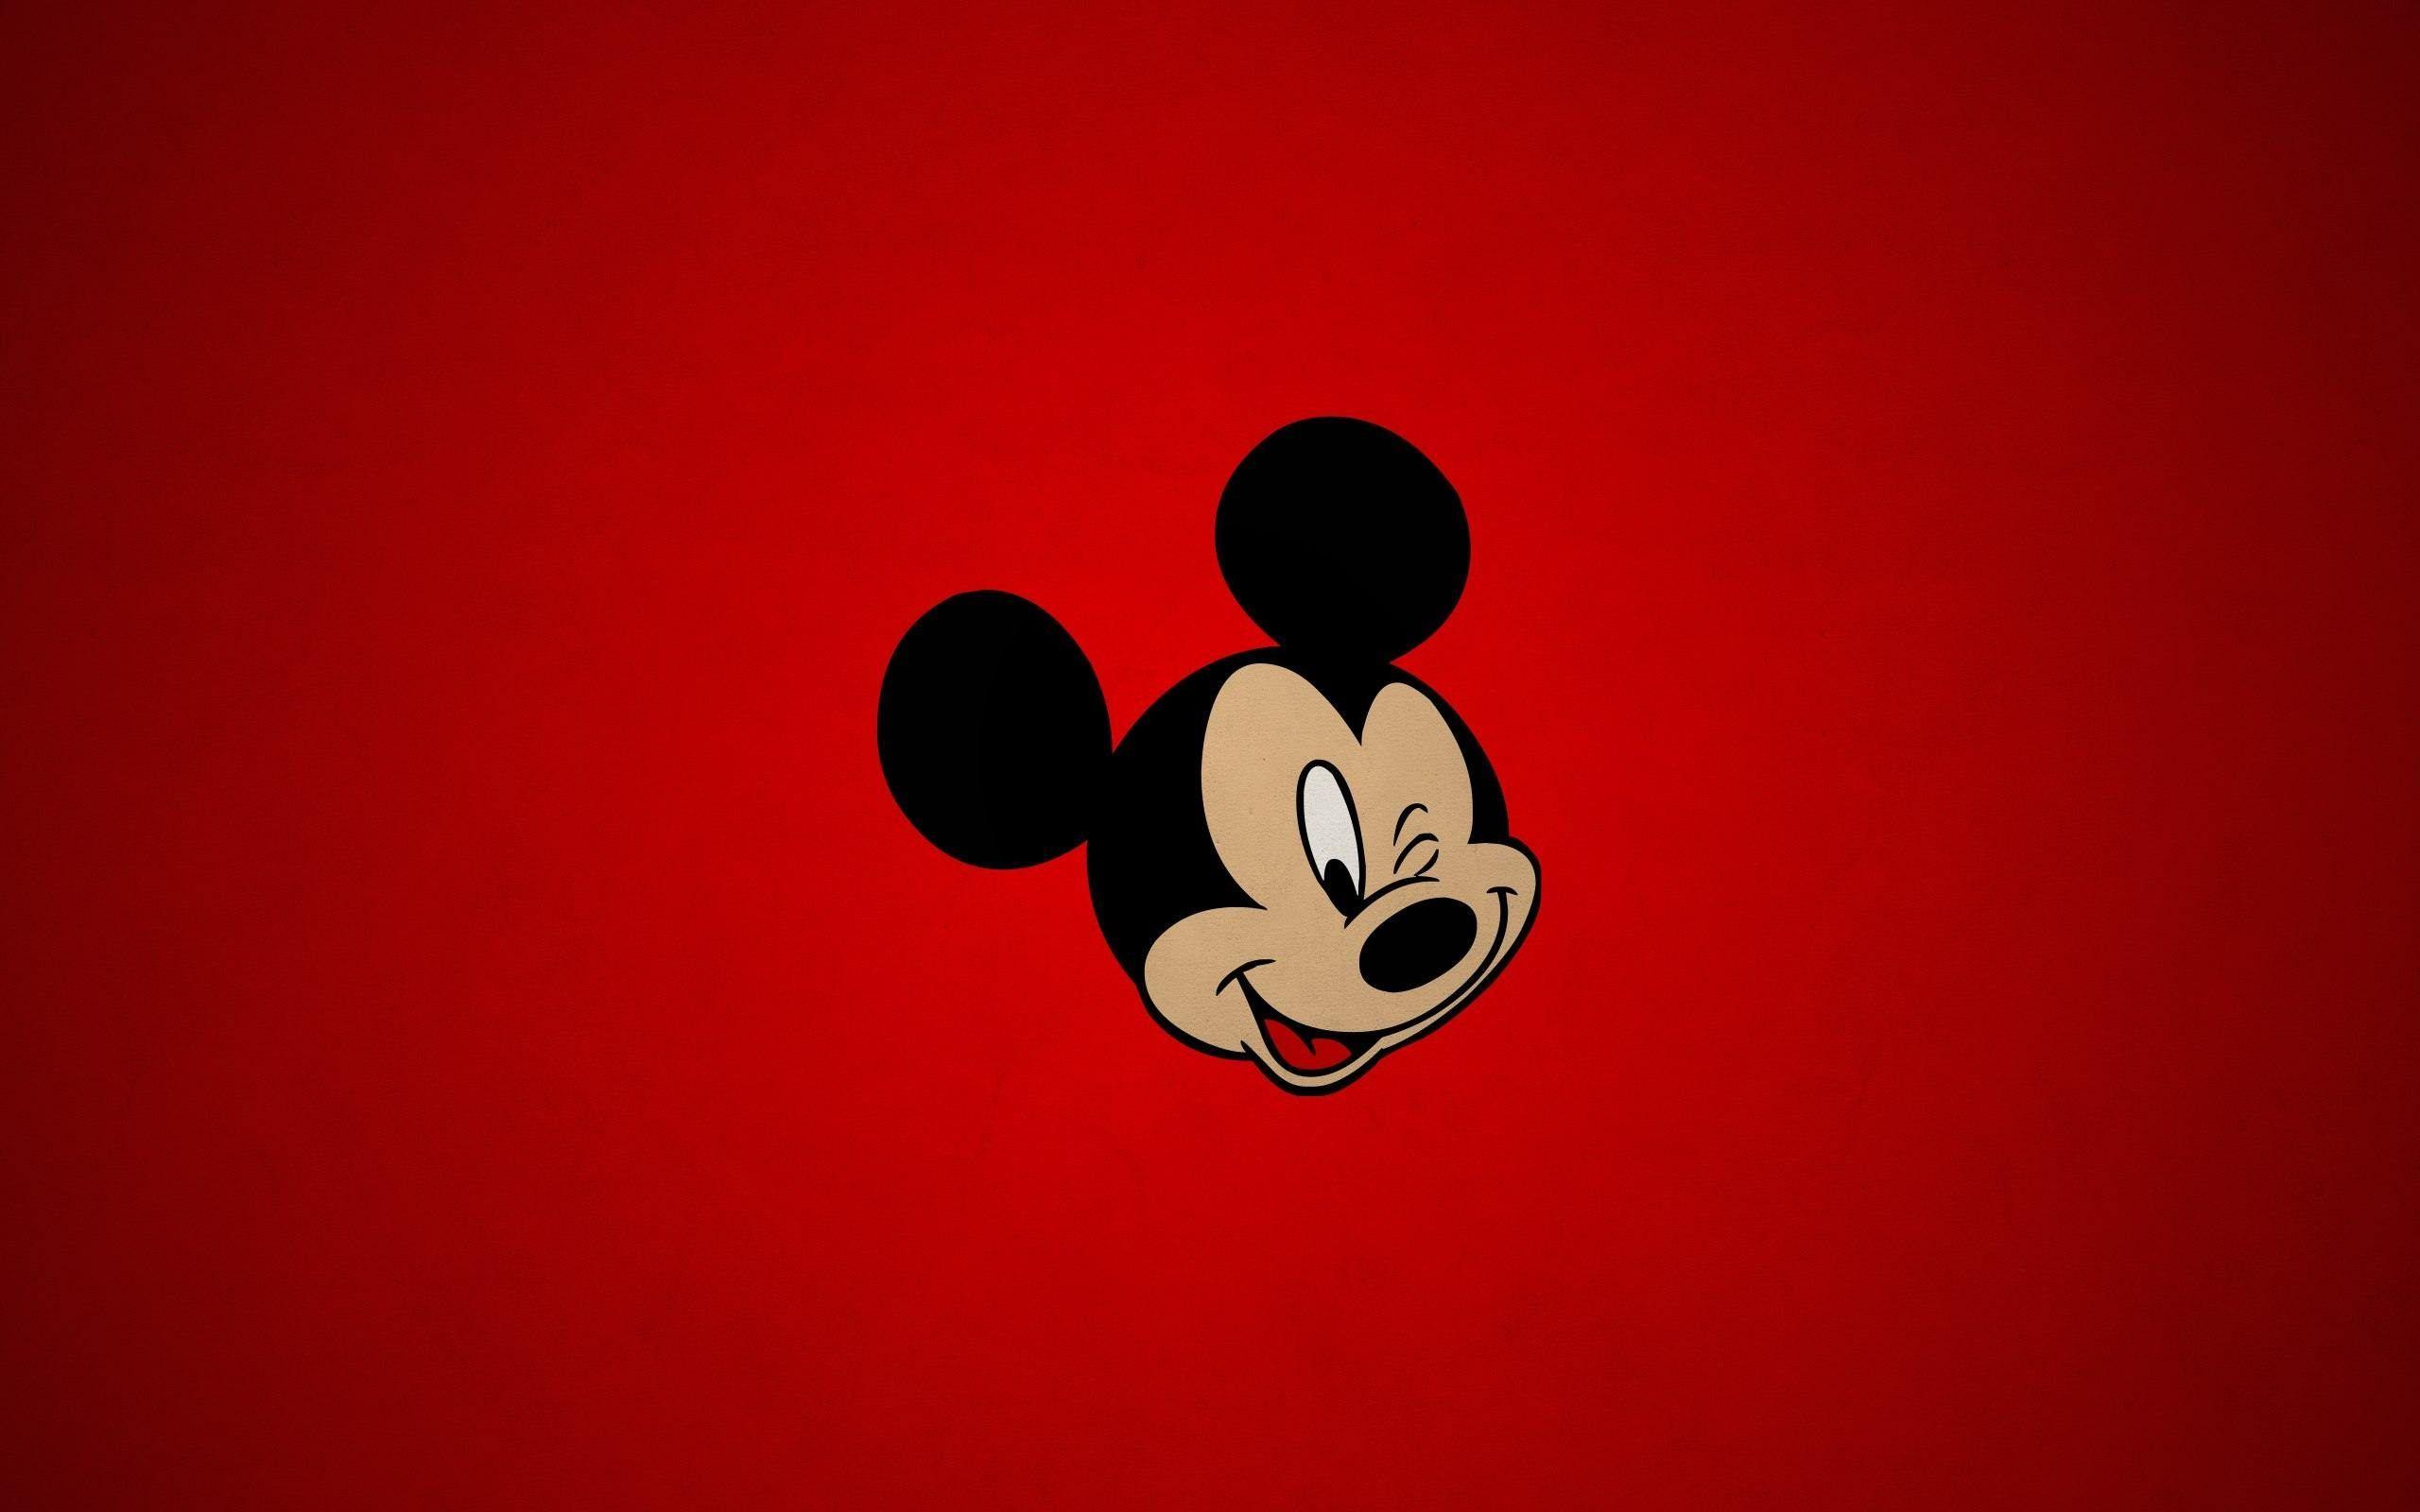 MINNIE MOUSE AND MICKEY MOUSE IPHONE WALLPAPER BACKGROUND. HD